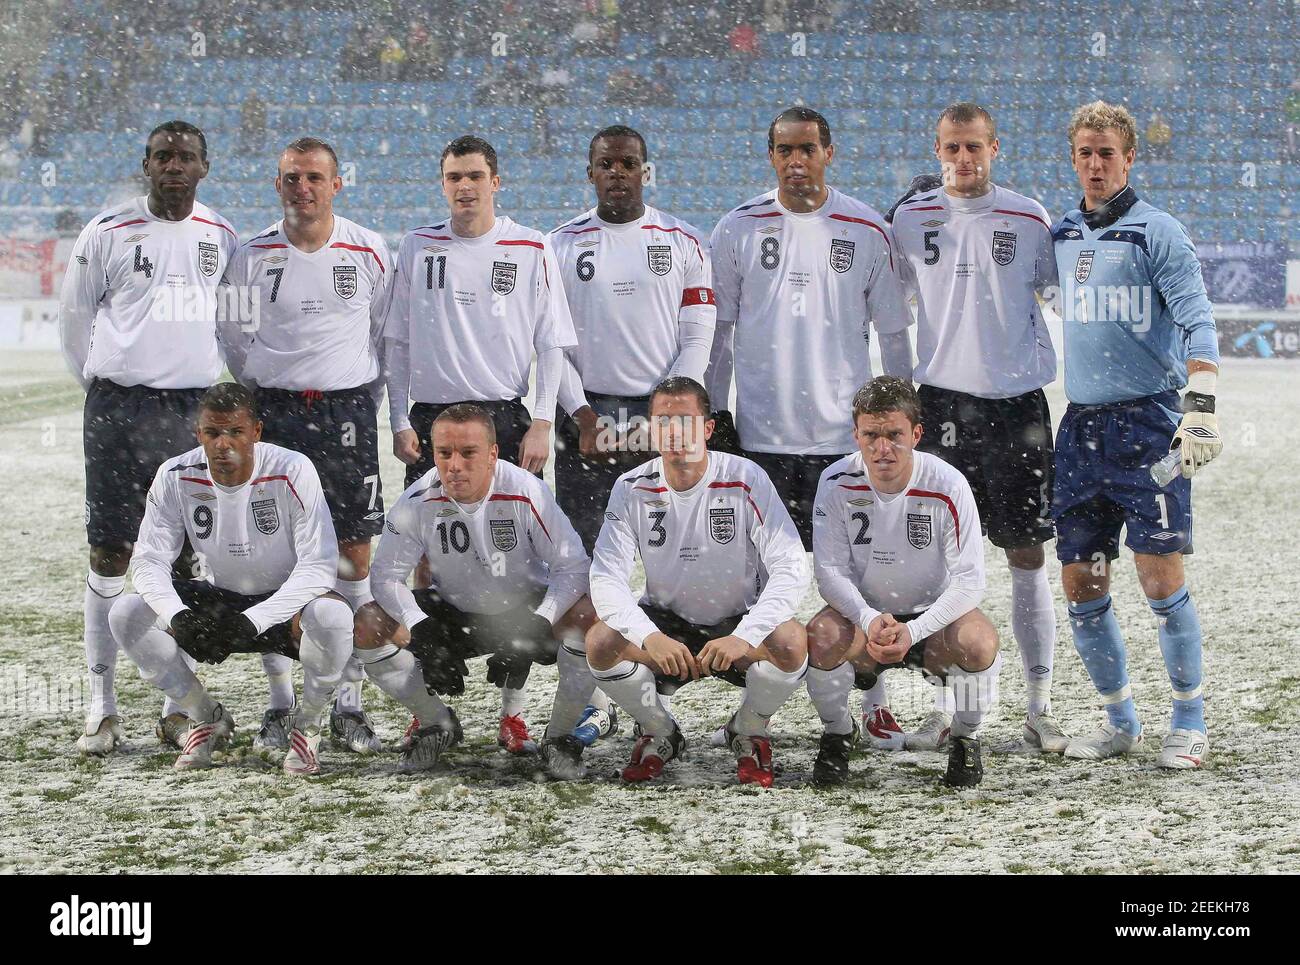 Football - Norway U21 v England U21 Under 21 International Friendly -  Komplett.no Arena, Sandefjord, Norway - 27/3/09 England line up before the  match Mandatory Credit: Action Images / Matthew Childs Livepic Stock Photo  - Alamy